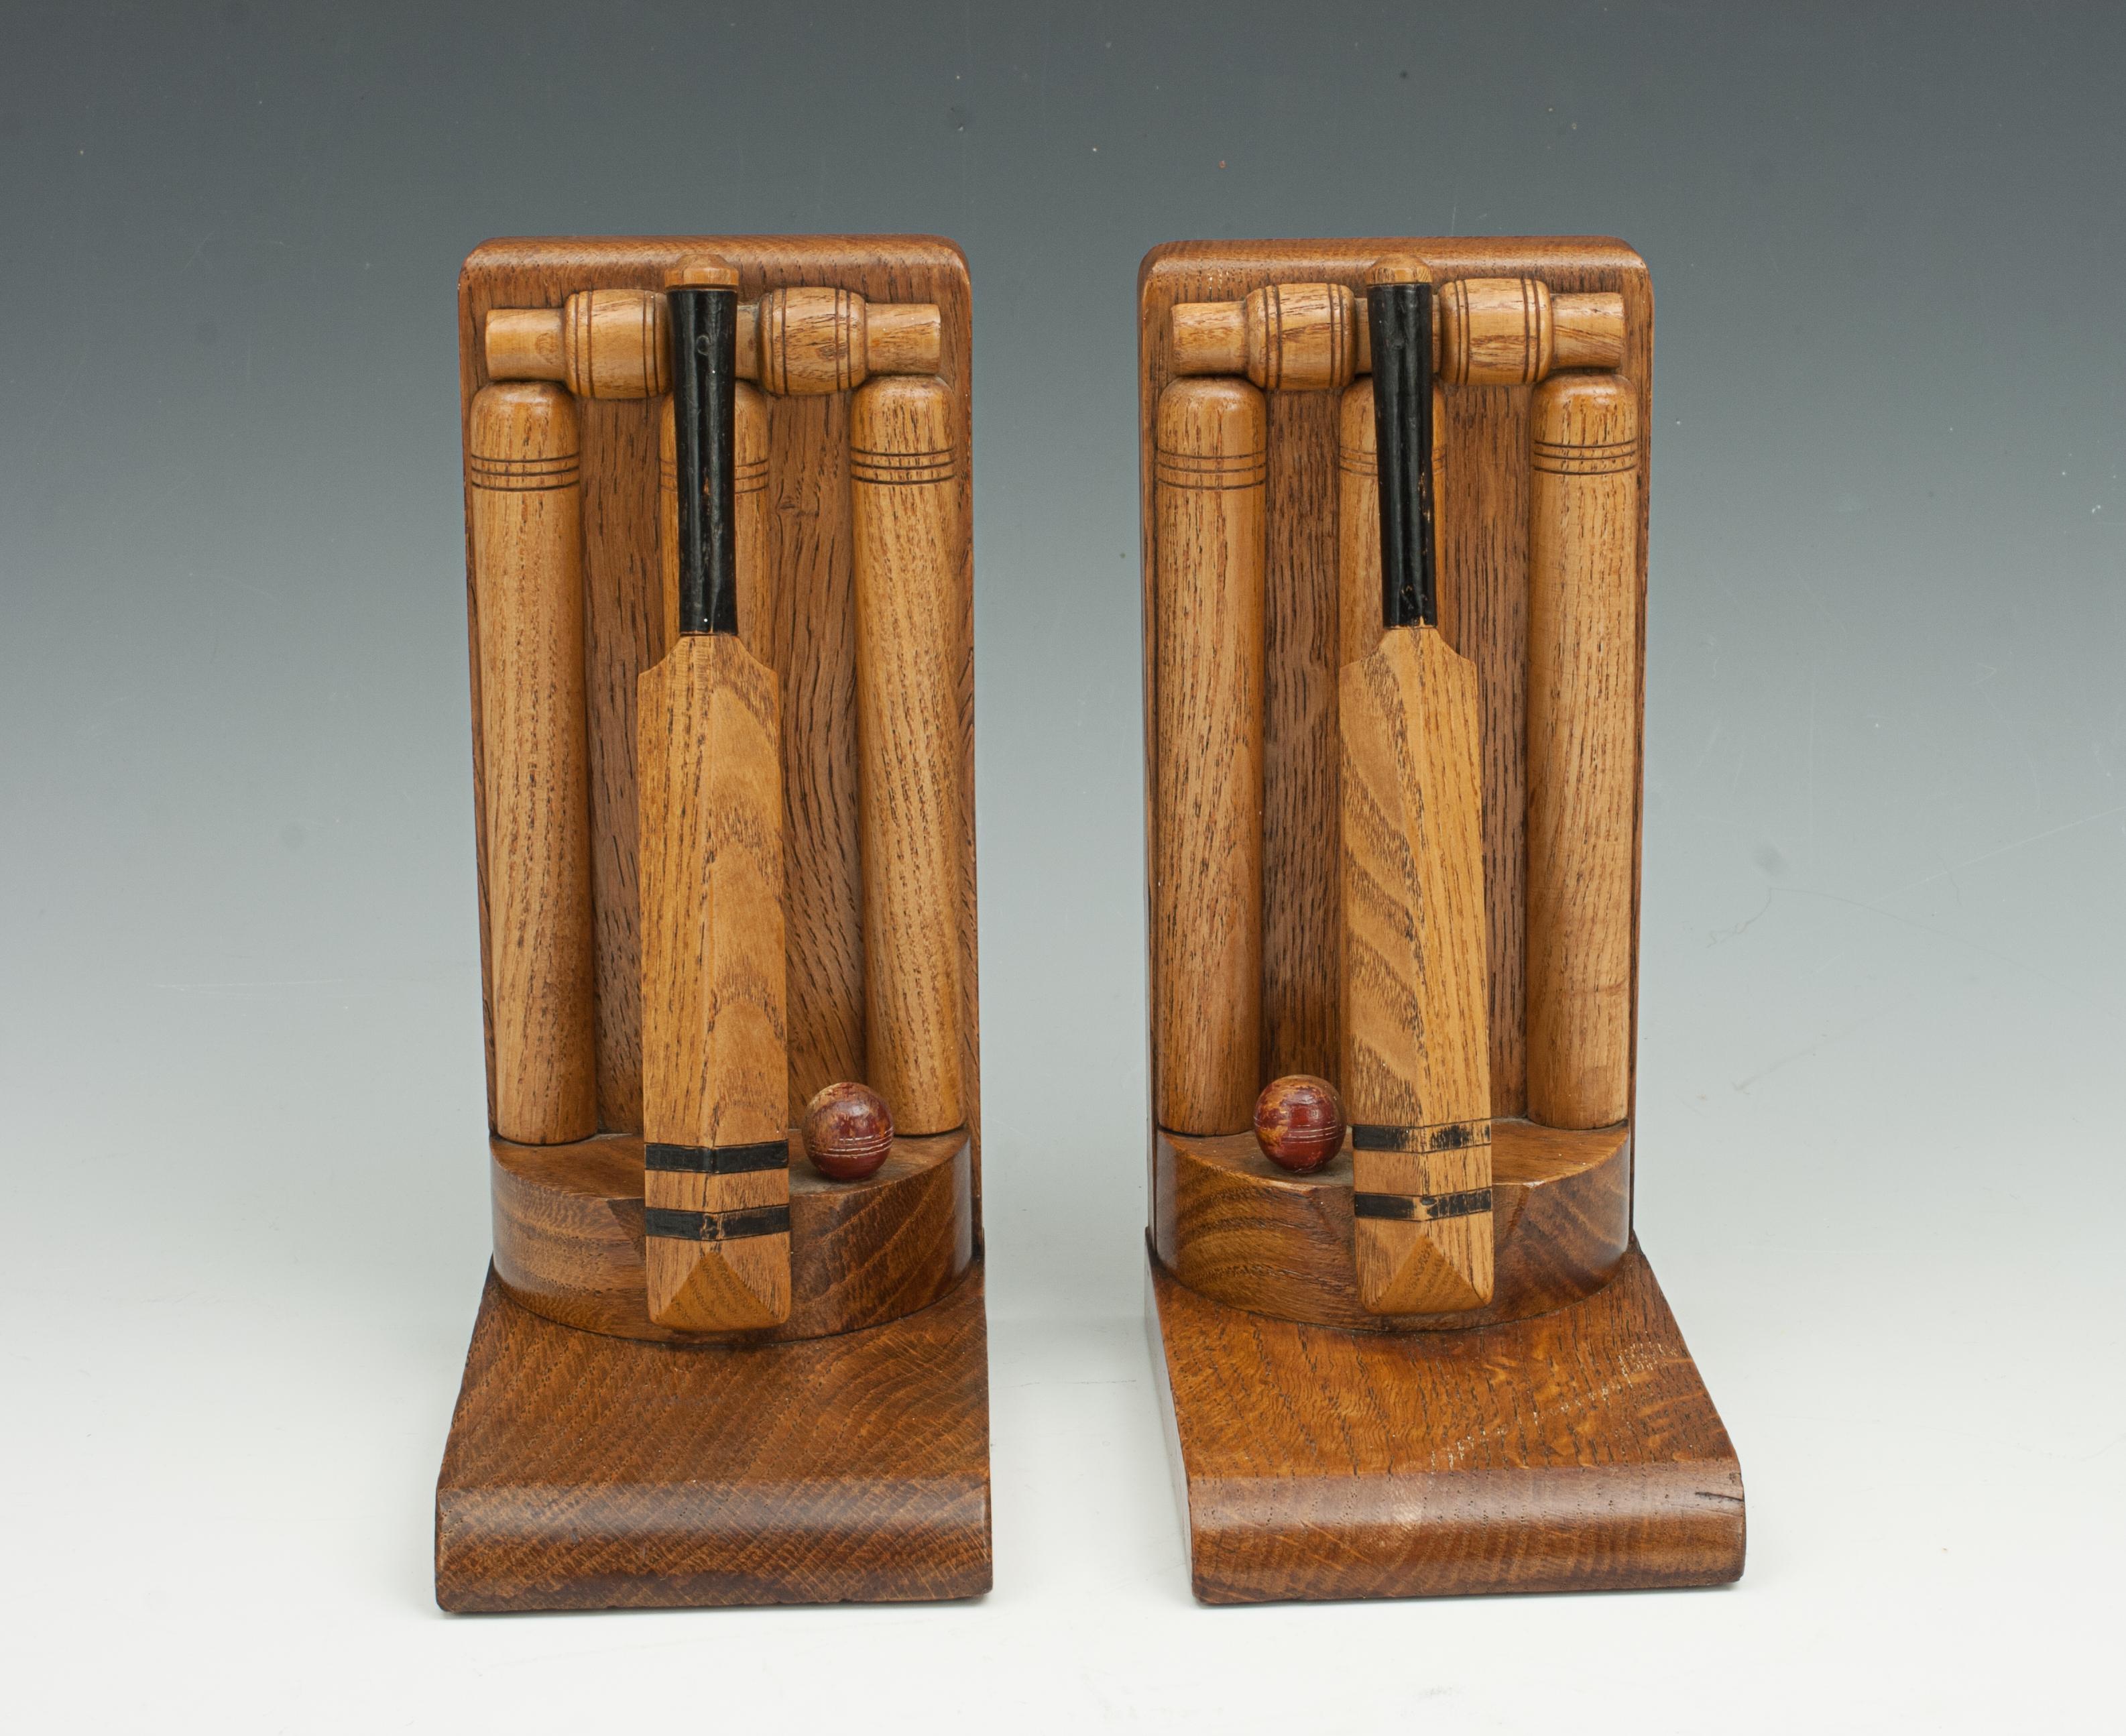 Cricket Shelf Tidy Heavy Resin Bookends Vintage Style BRAND NEW 